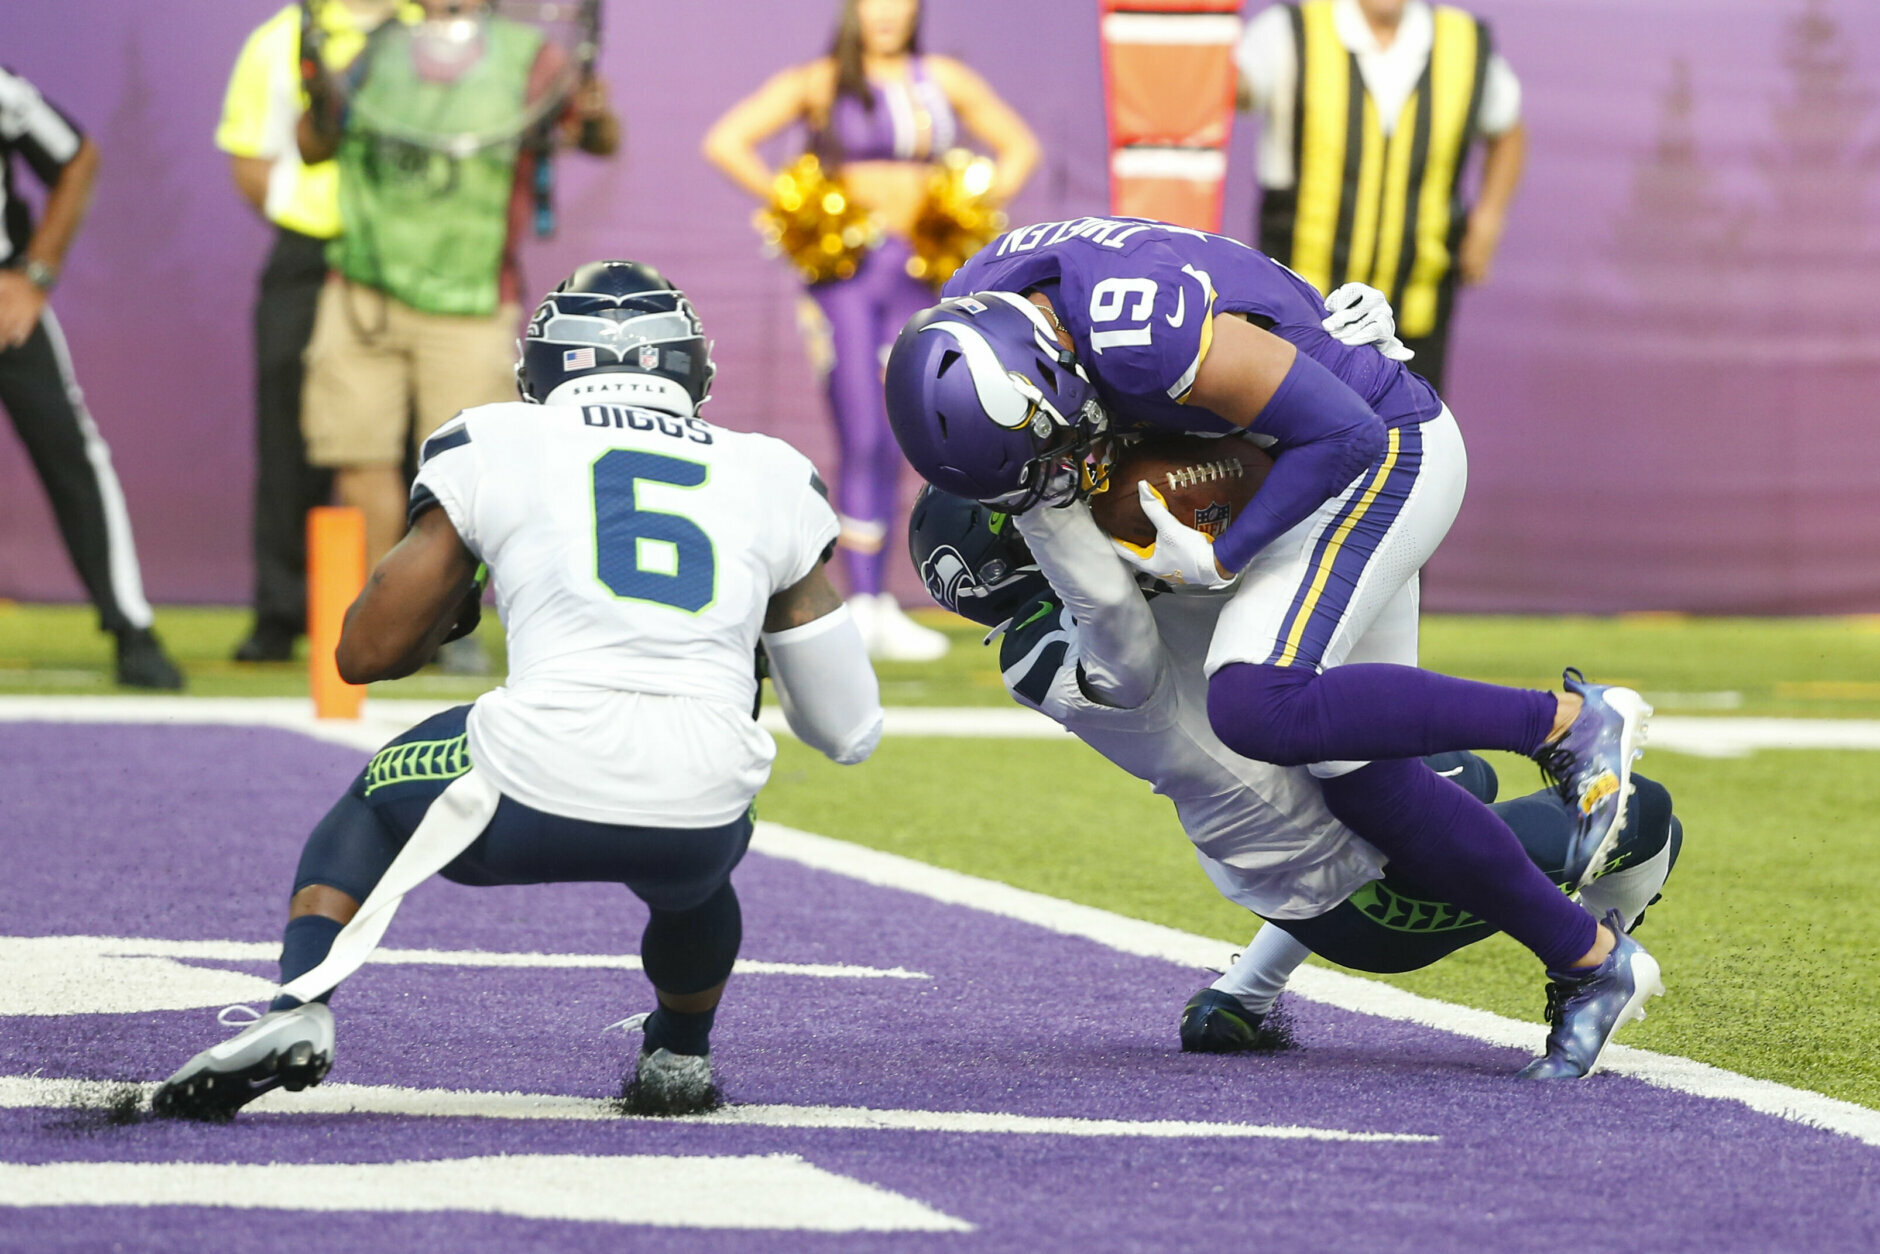 <p><em><strong>Seahawks 17</strong></em><br />
<em><strong>Vikings 30</strong></em></p>
<p>Seattle gave up 23 unanswered points to a Minnesota squad that hadn&#8217;t beaten them in 12 years, proving yet again the Legion of Boom days are a distant memory. The NFC West is way too tough for the Seahawks to blow games like this, and with the Niners and undefeated Rams next up on the schedule, Seattle may already be in trouble.</p>
